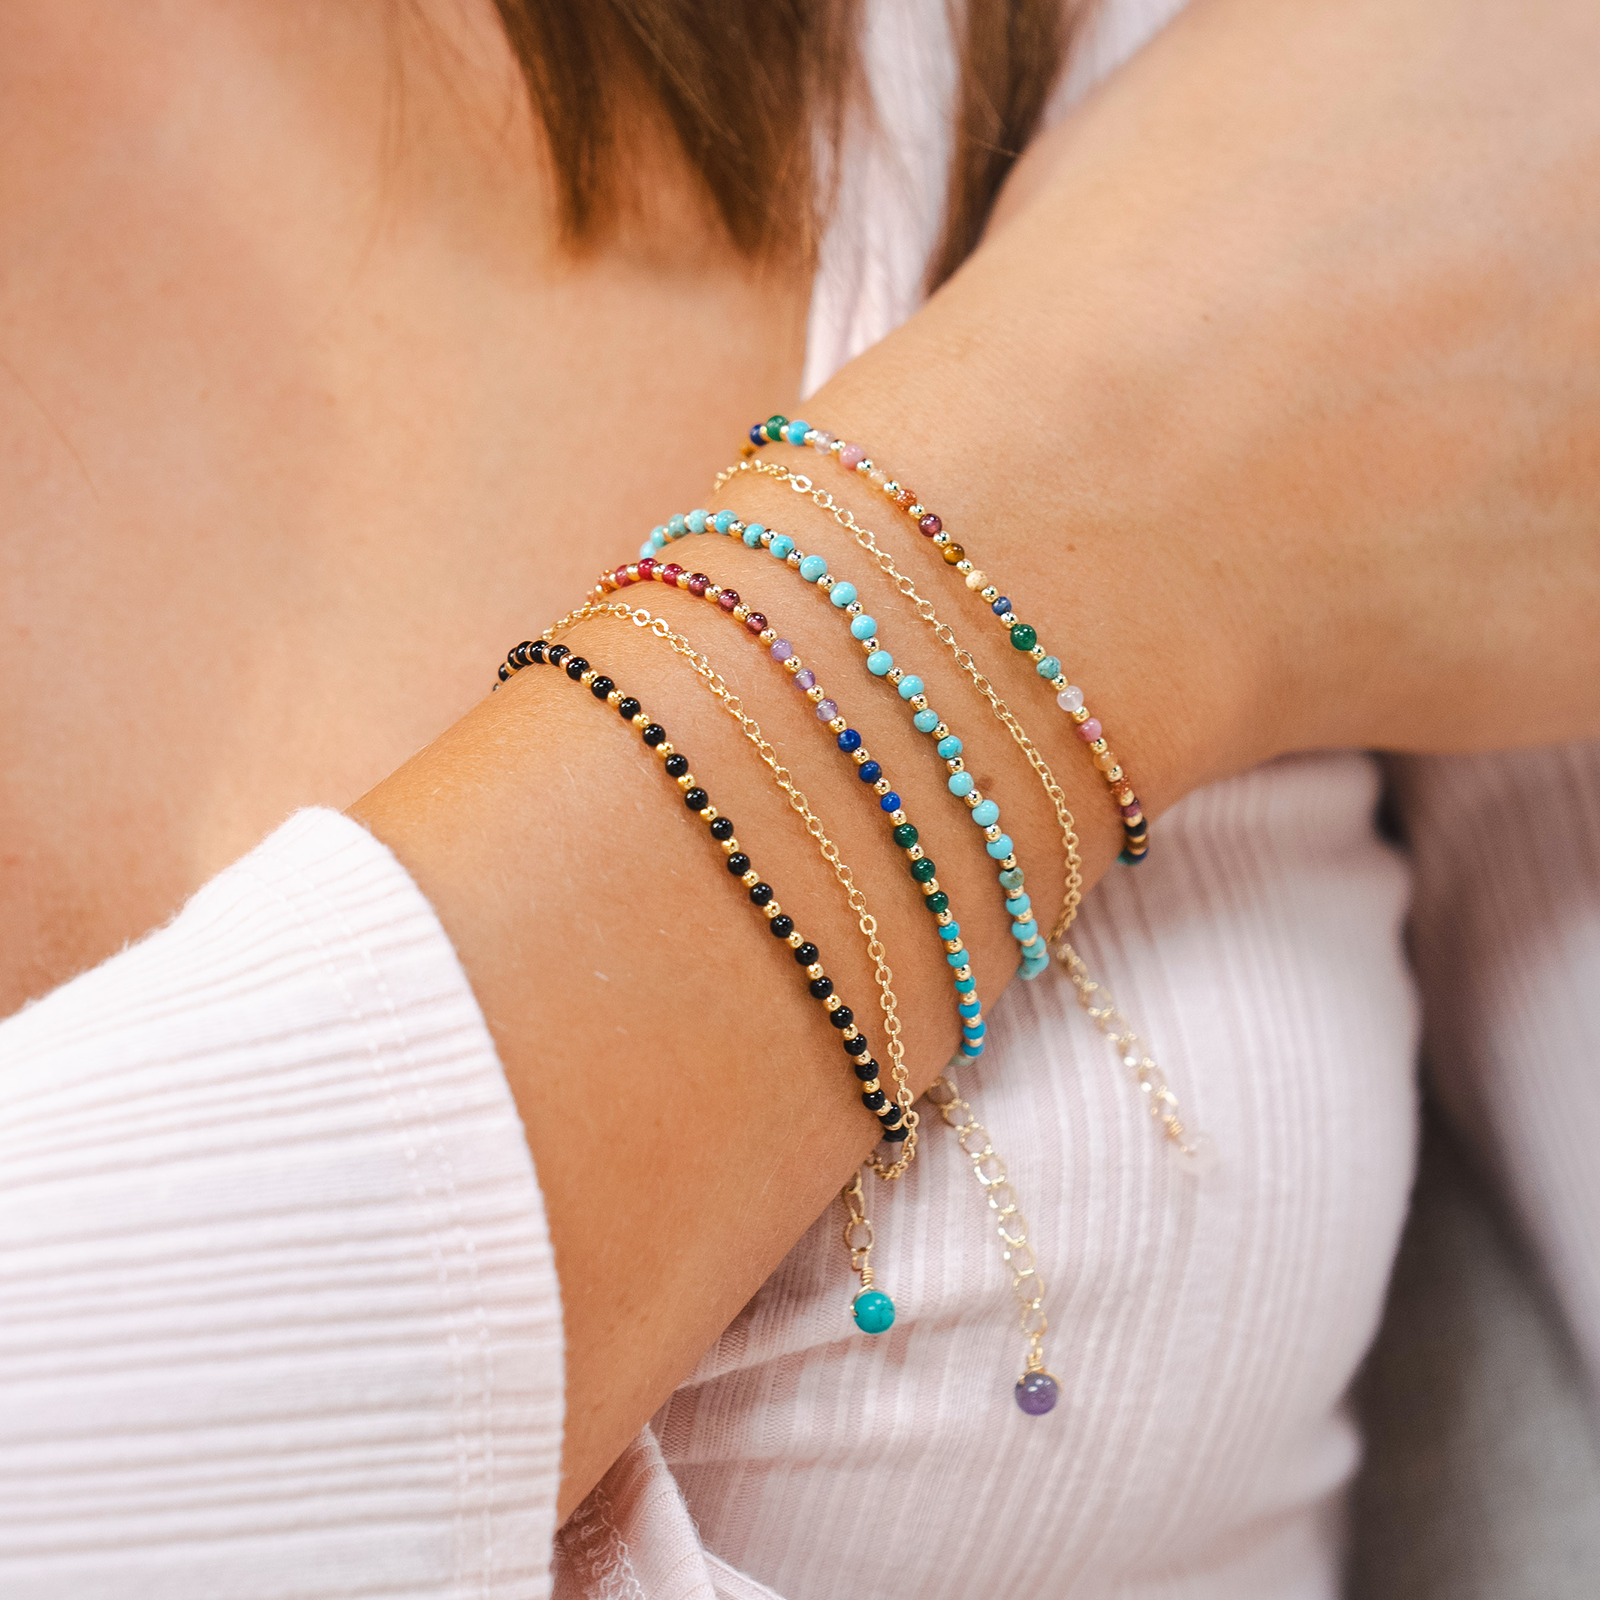 Dainty bracelet with assorted multi-color stones and gold beads